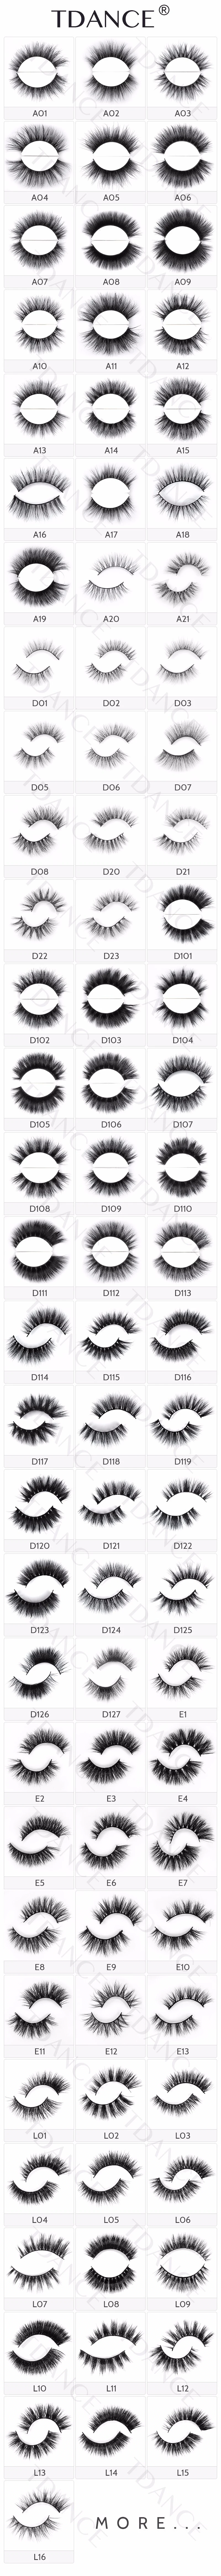 Wholesale Top Quality 25mm 3D Mink Eyelashes Custom Packaging